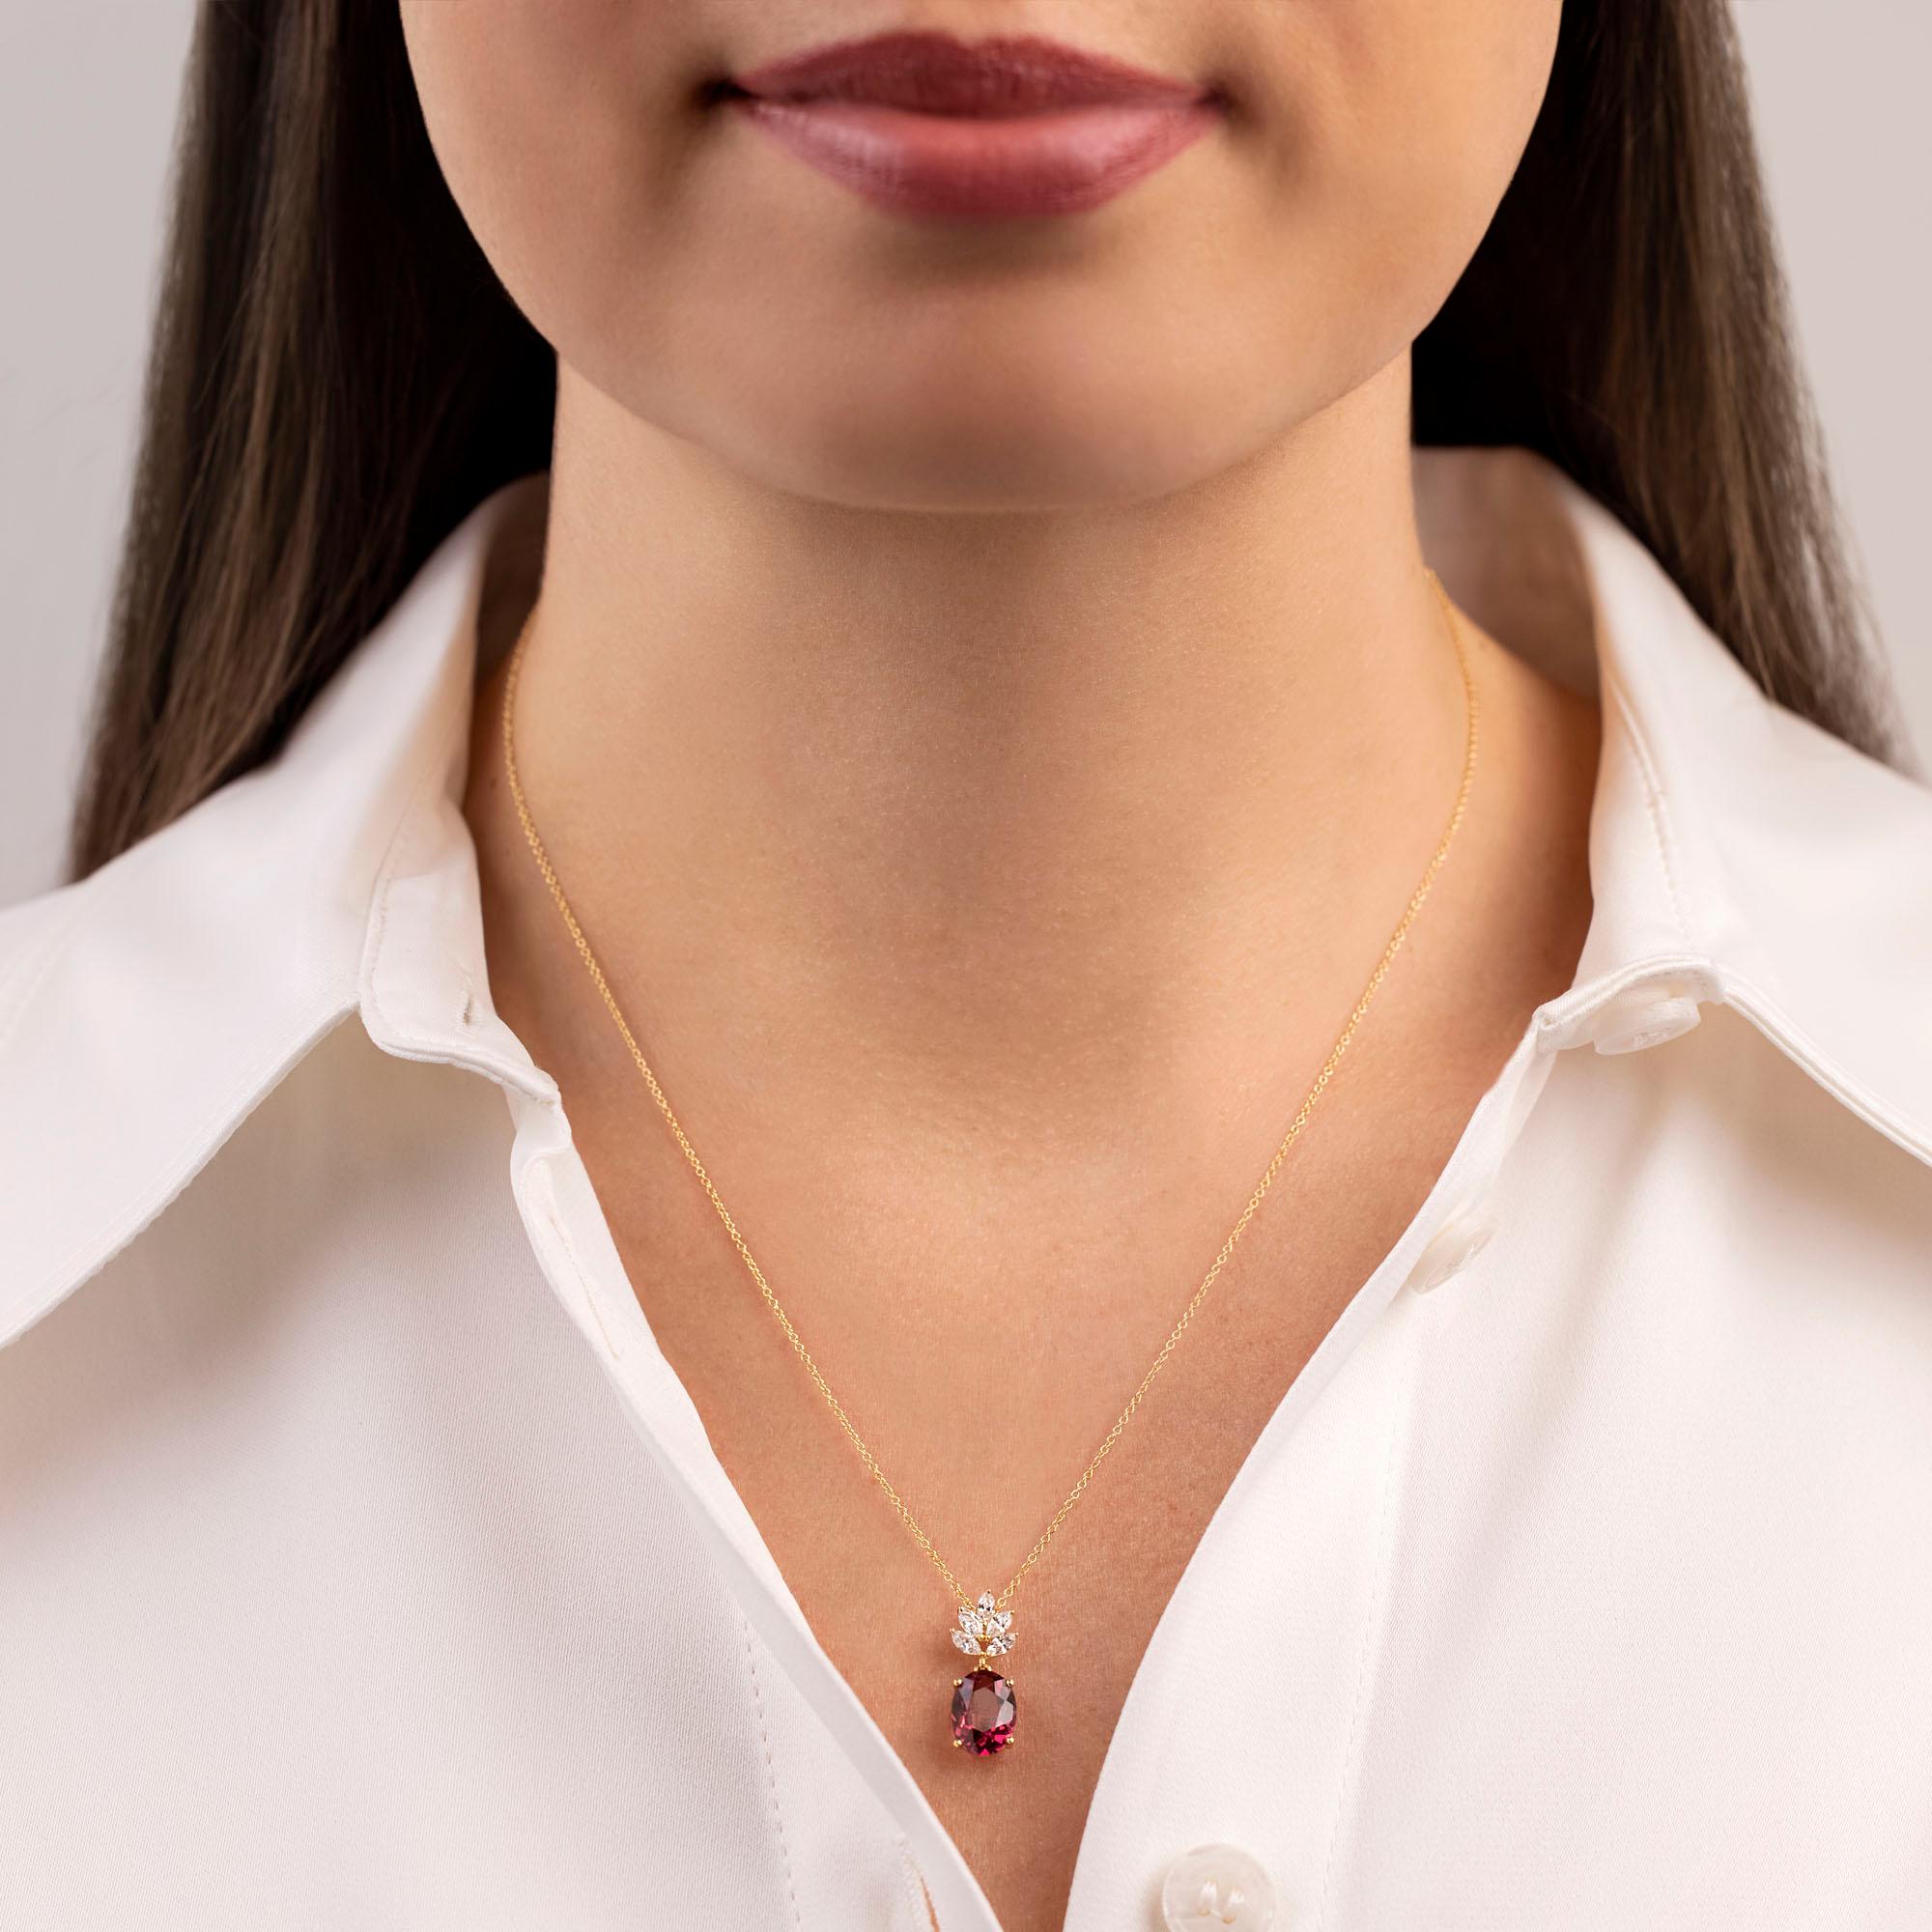 Our Olympia Pendant is set in a simple yet elegant design which highlights the rich pinkish red rubellite that dangles below an assortment of twinkling marquise shape diamonds. It is suspended from a delicate 18